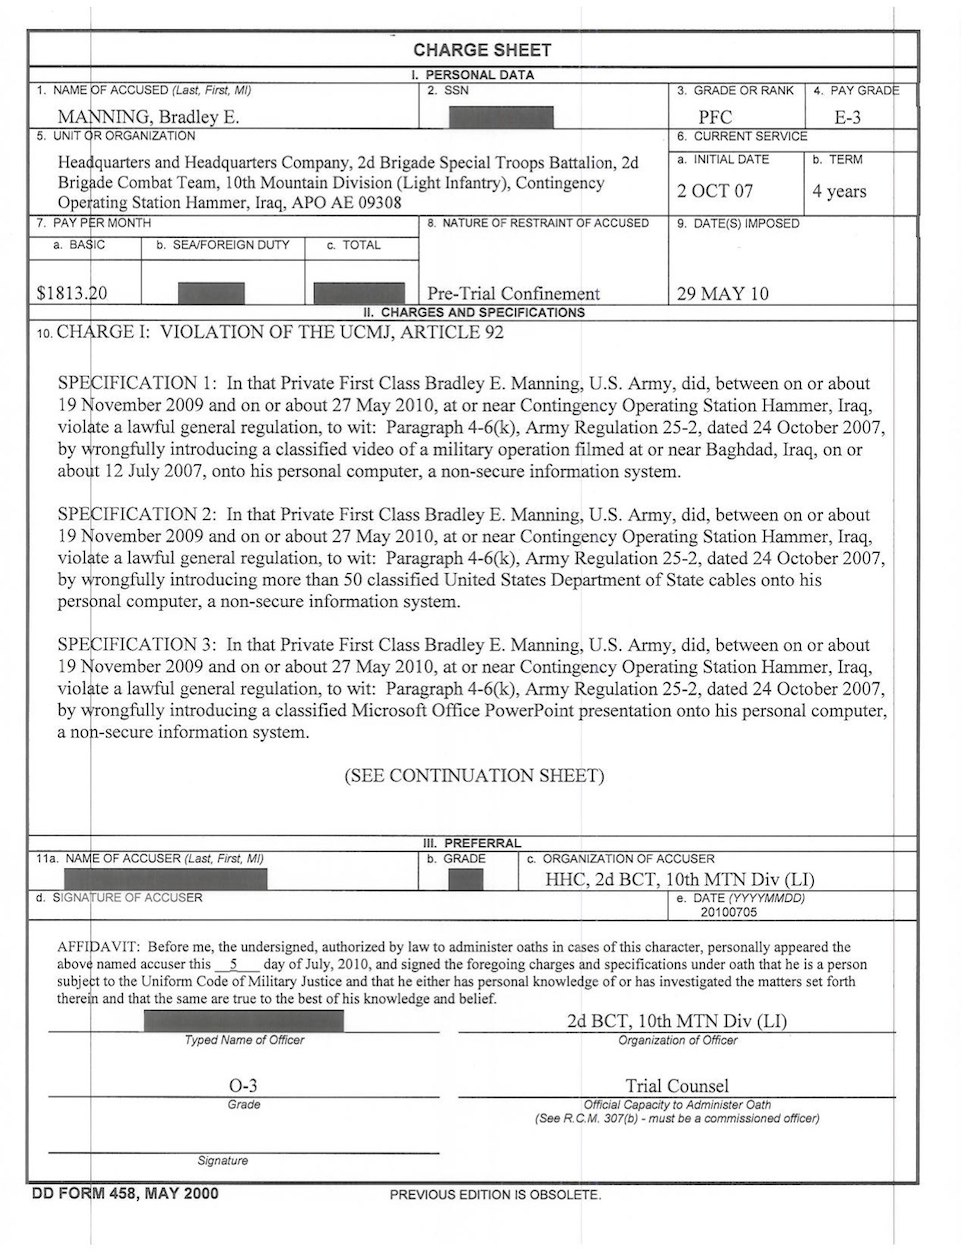 Manning charge sheet, page 1